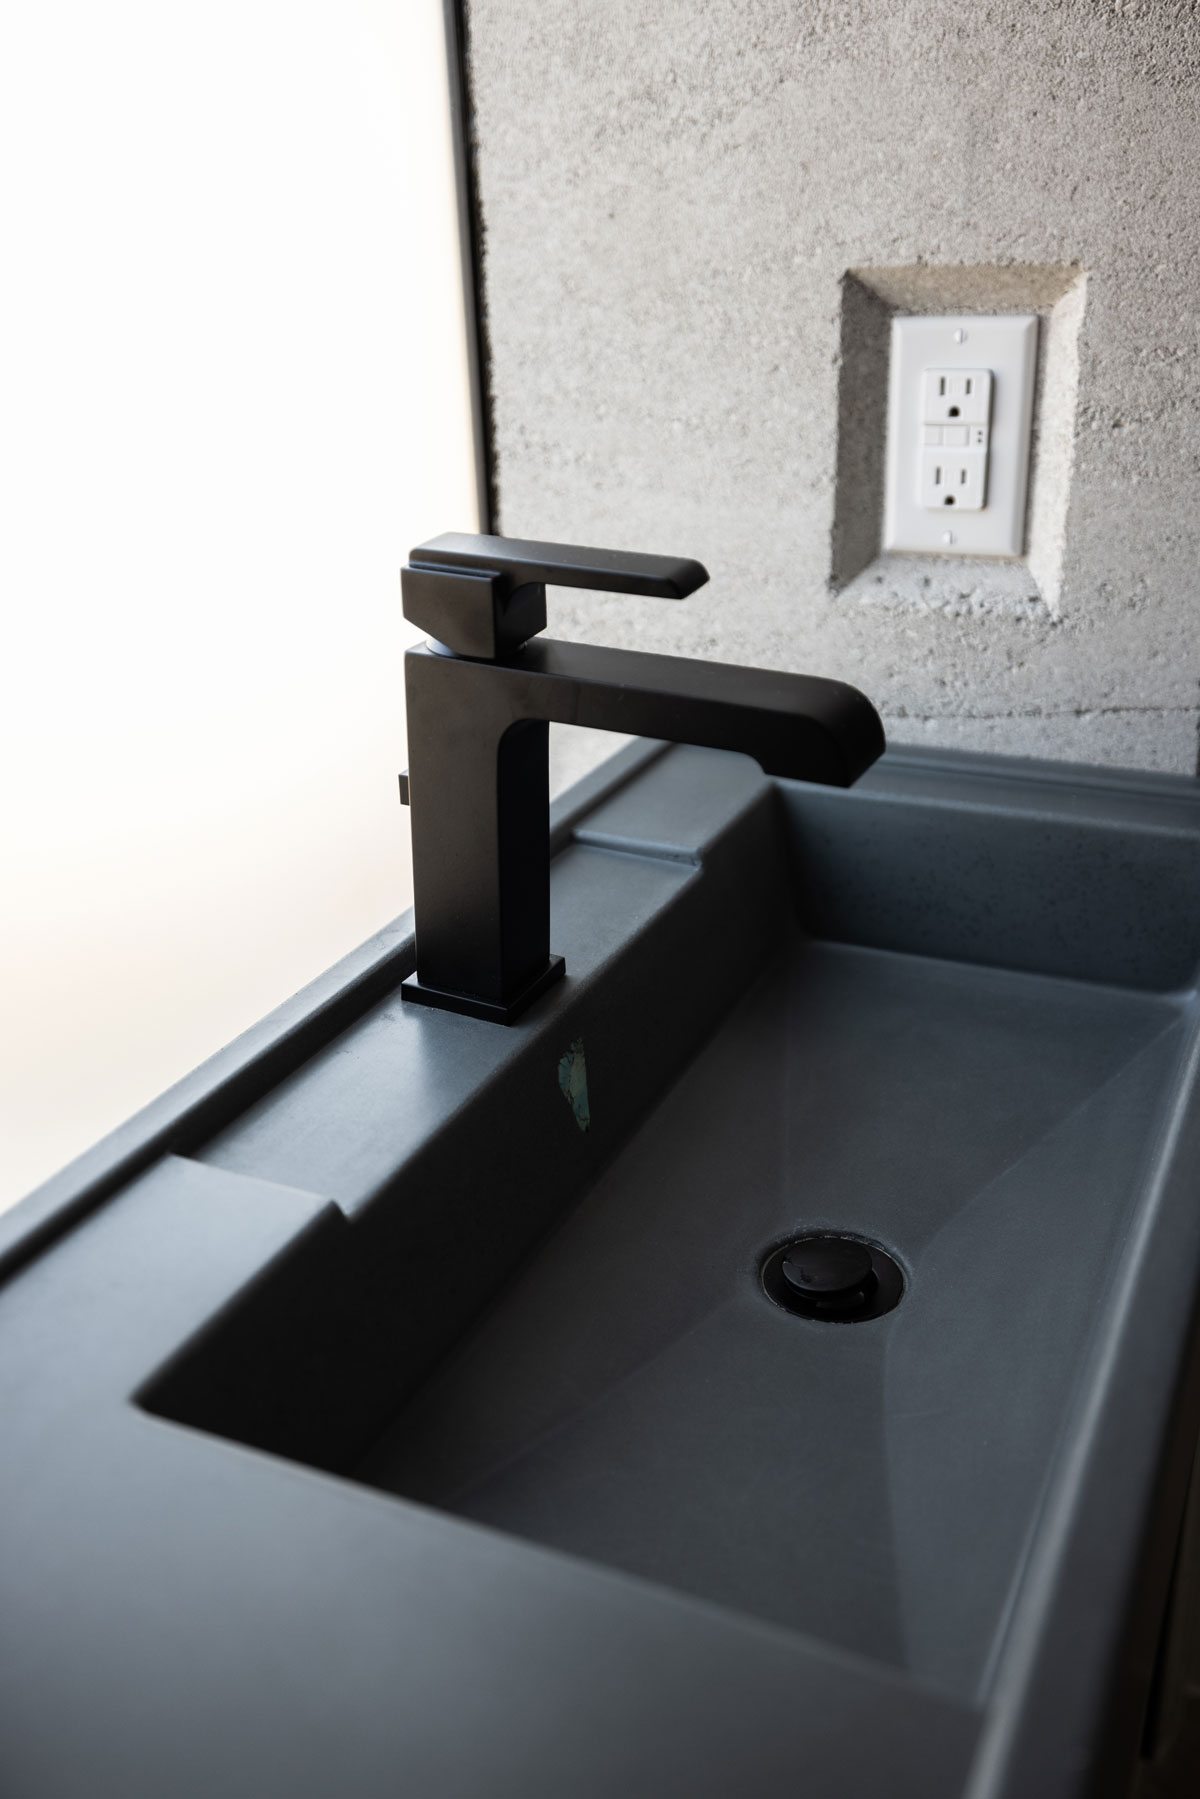 A custom concrete sink, made of GFRC, installed in a modern rammed earth house